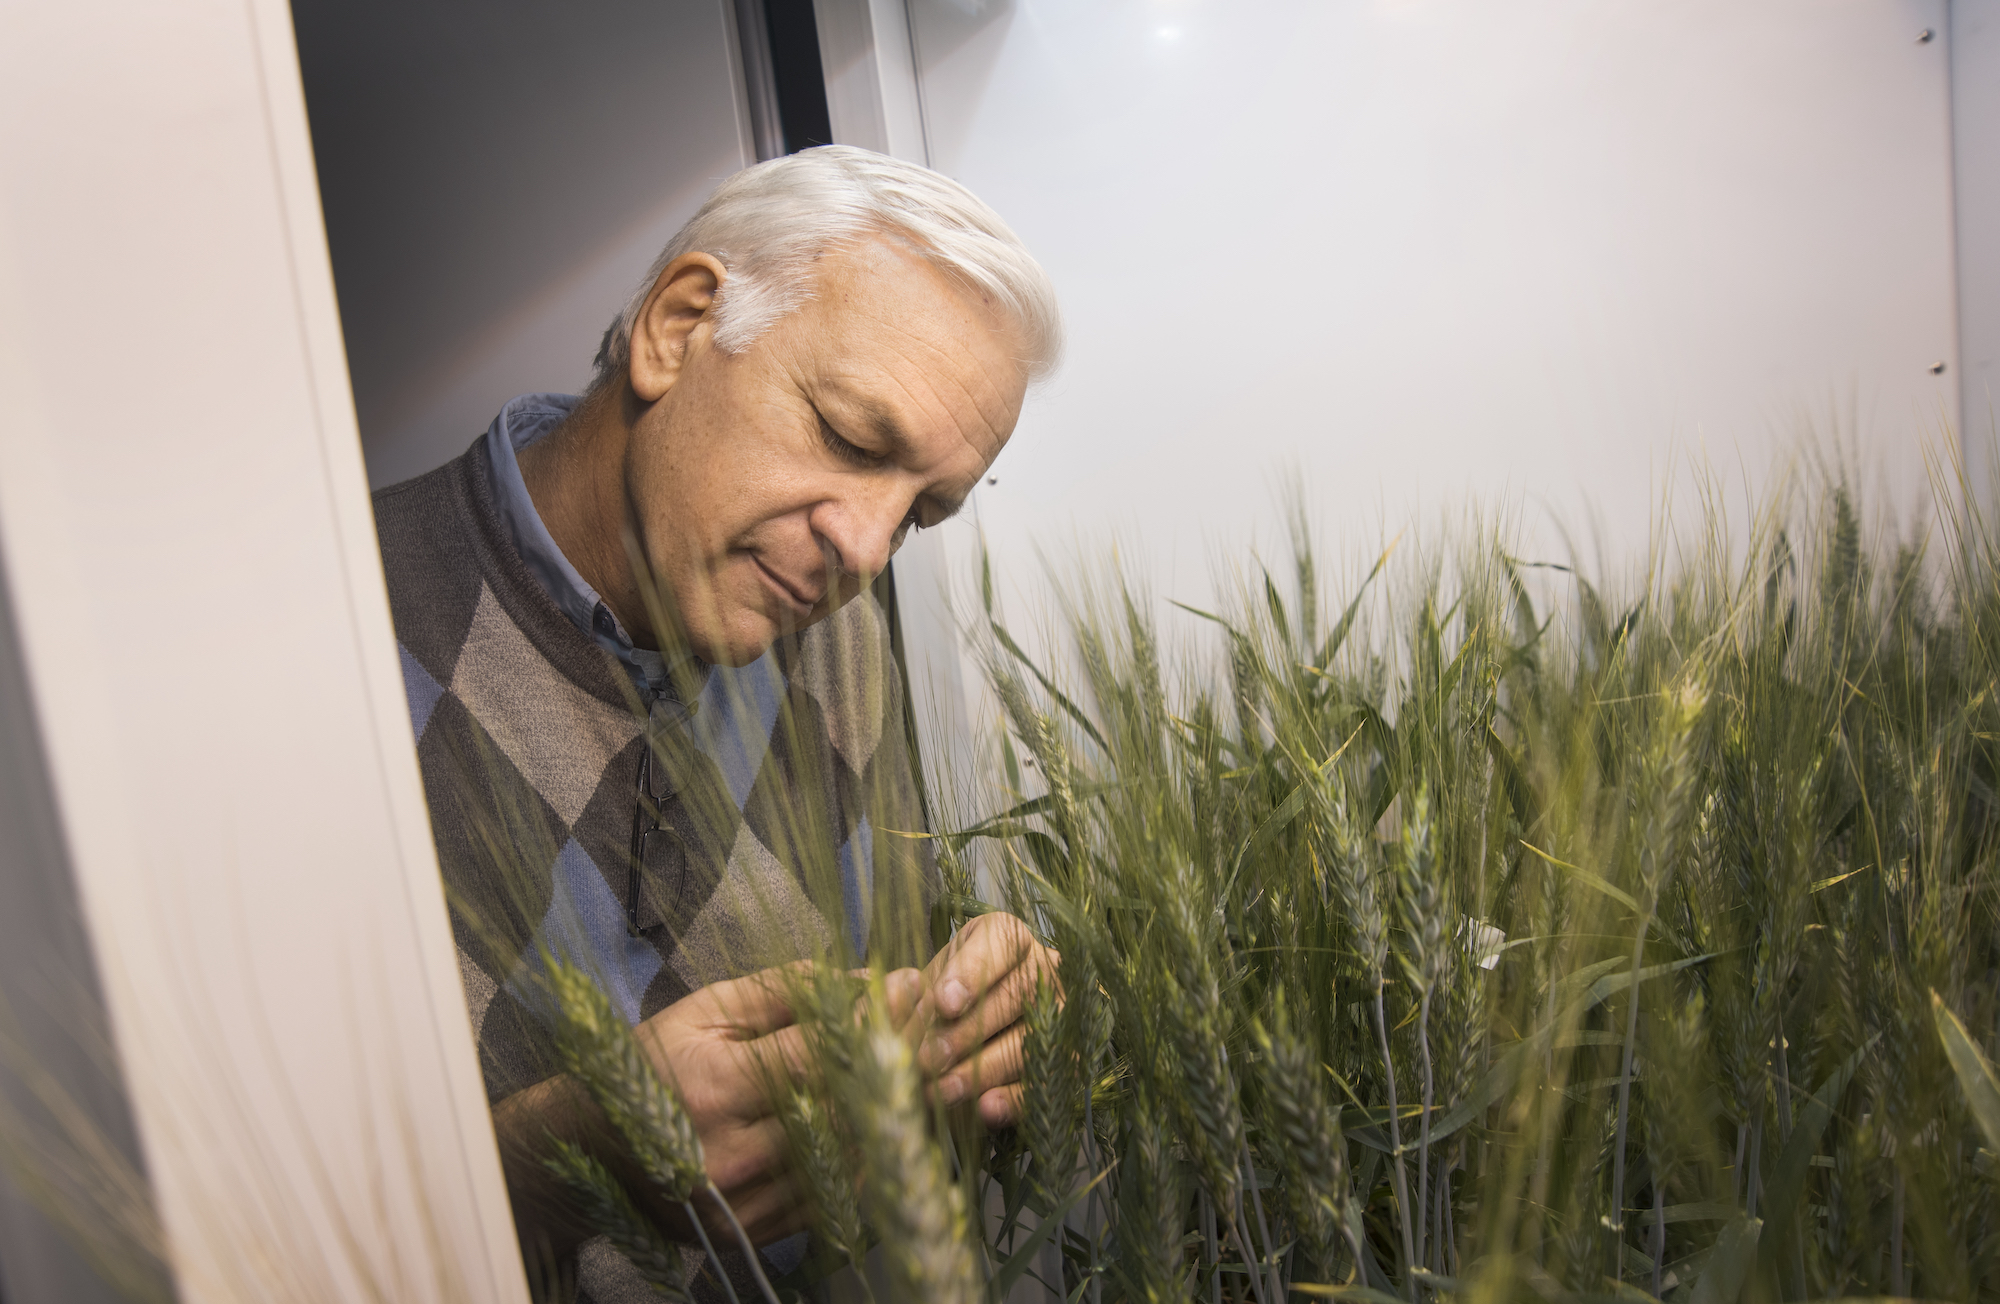 Man inspects straws of wheat